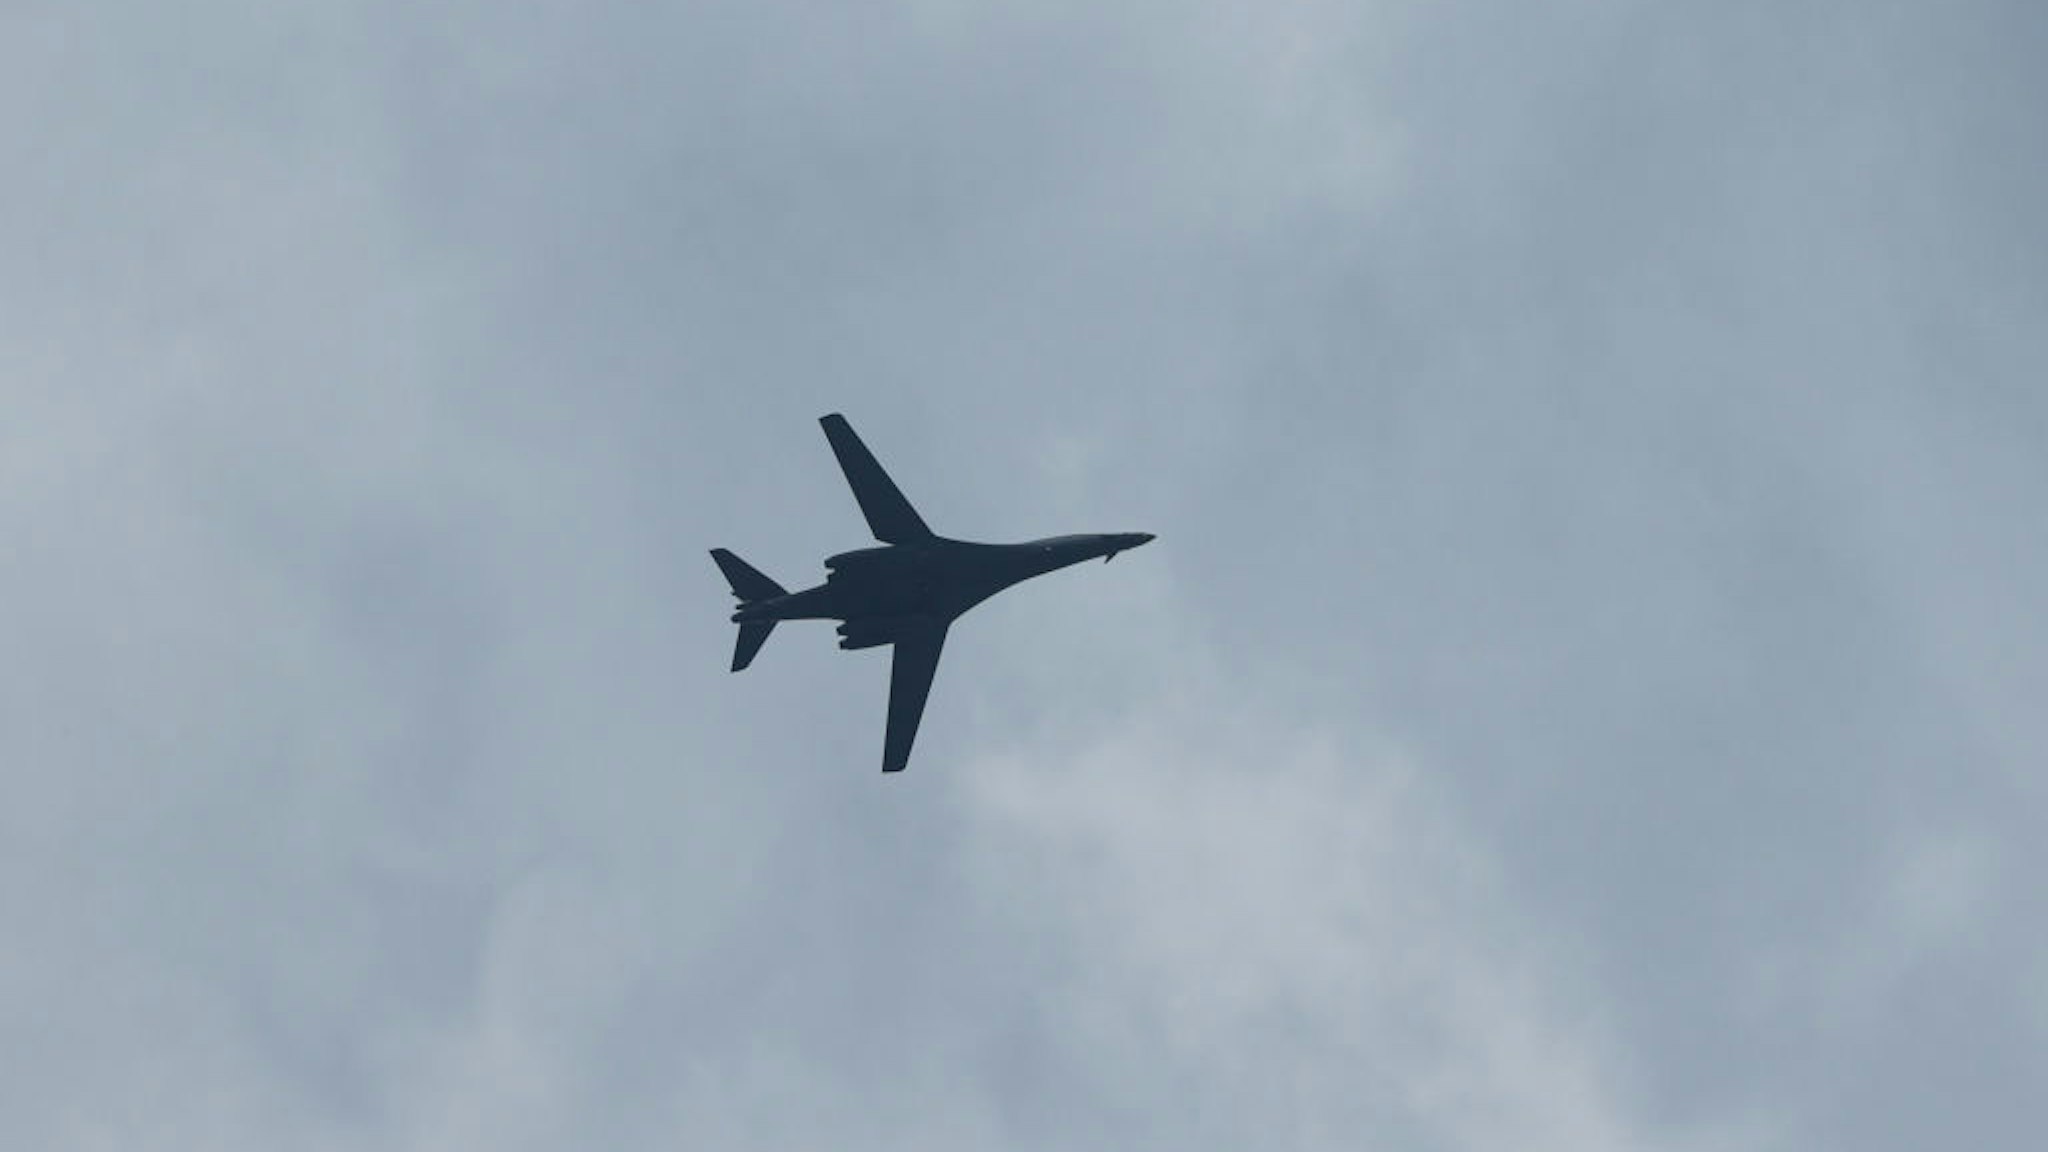 SARAJEVO, BOSNIA AND HERZEGOVINA - MAY 30: B-1B Lancer heavy-bomber aircraft of United States Air Force conducts a low altitude flight over Sarajevo, Bosnia and Herzegovina on May 30, 2023. Flight performed as a sign of the strong partnership between the two countries.